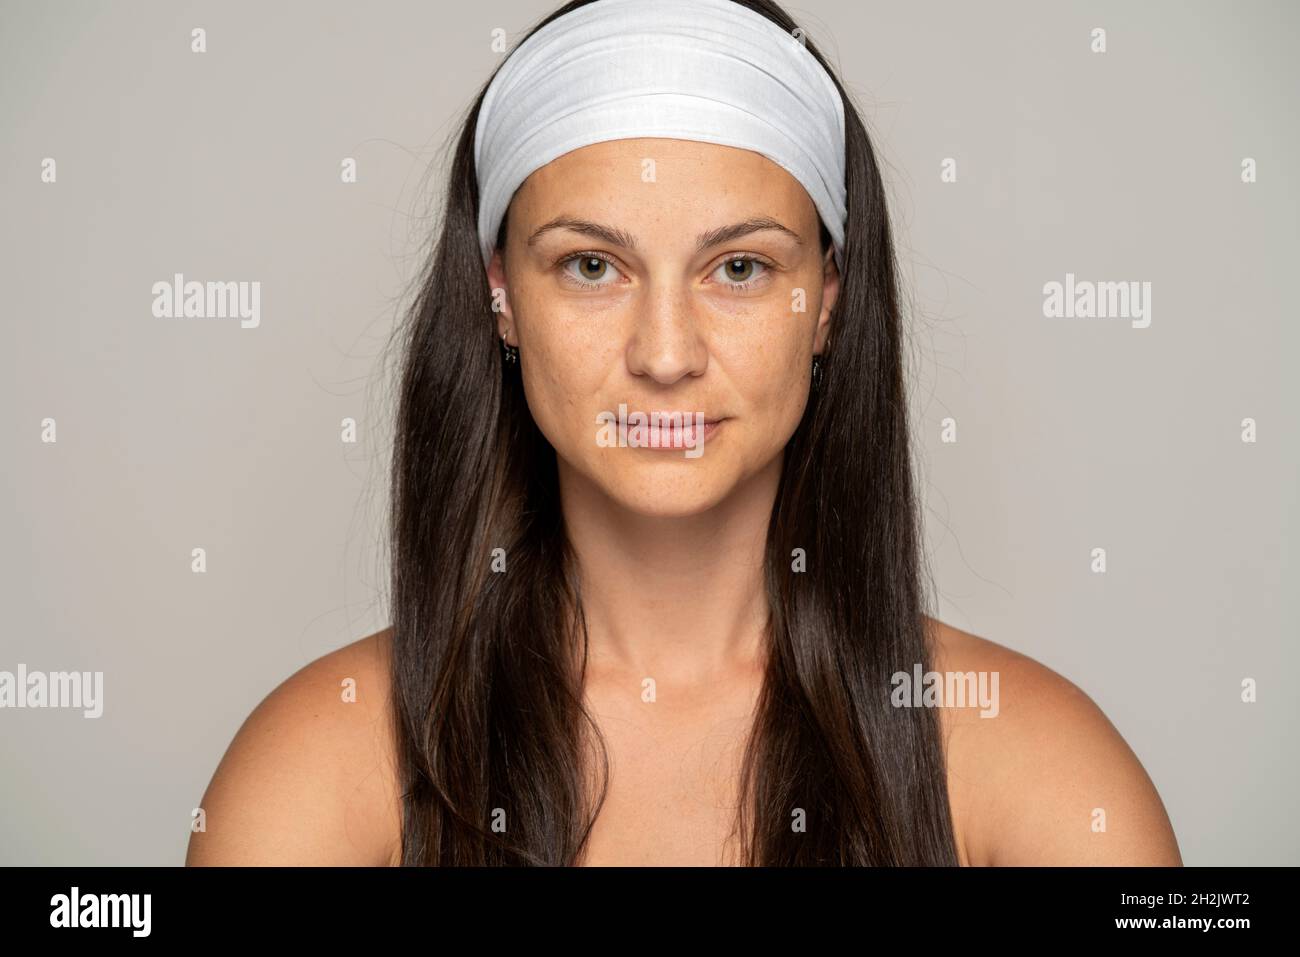 Portrait of a young woman without makeup and headband on a gray background Stock Photo